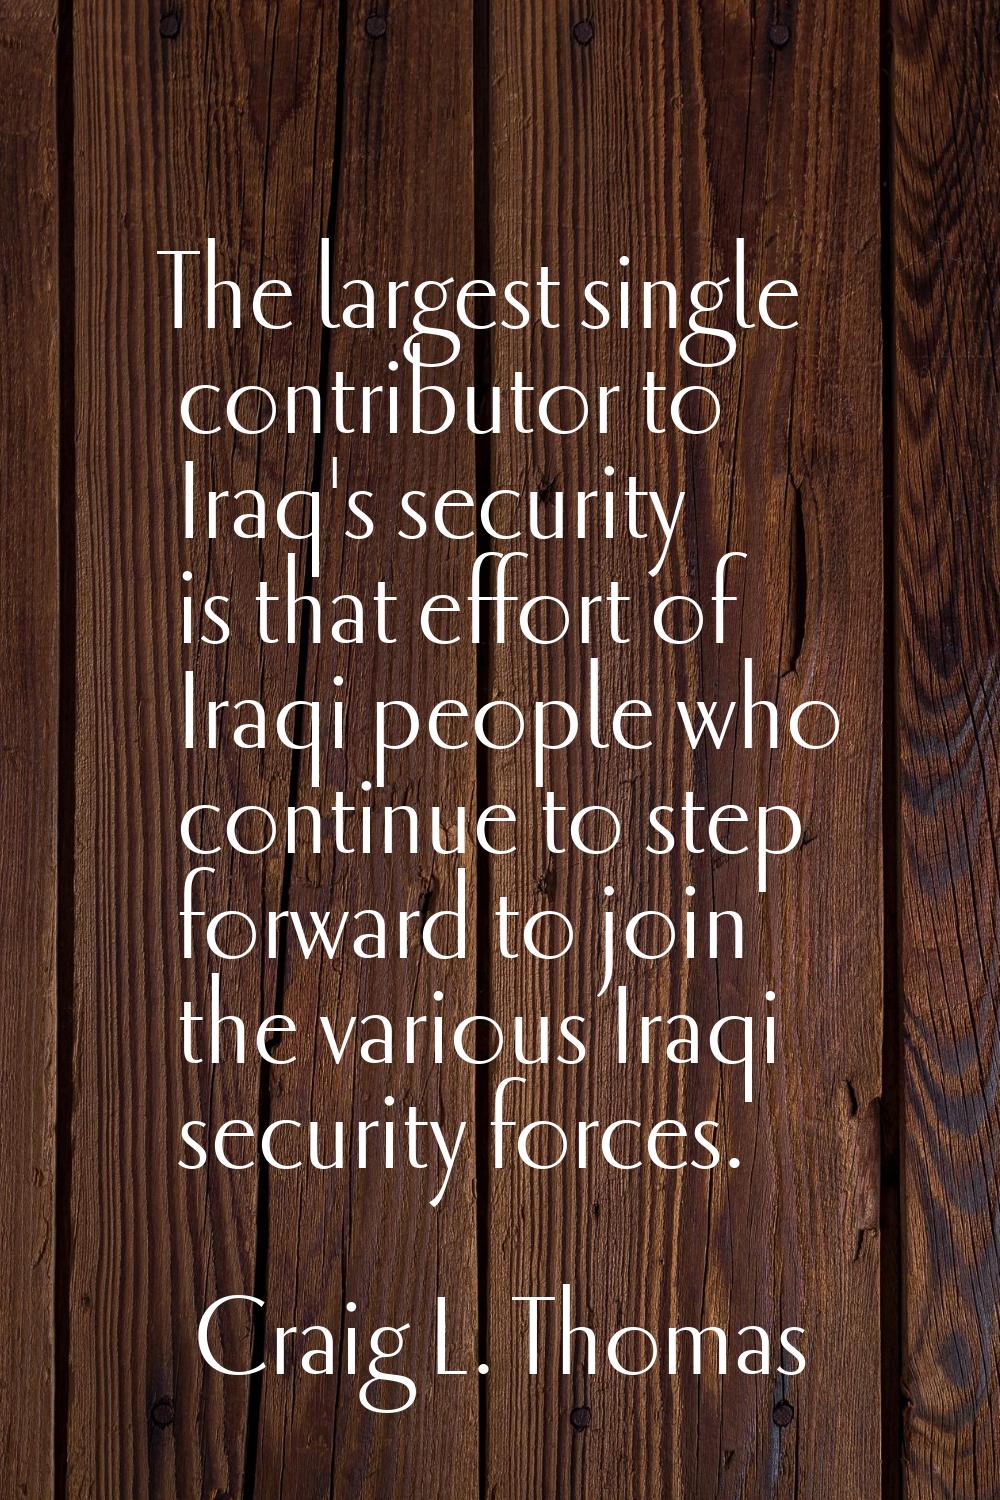 The largest single contributor to Iraq's security is that effort of Iraqi people who continue to st